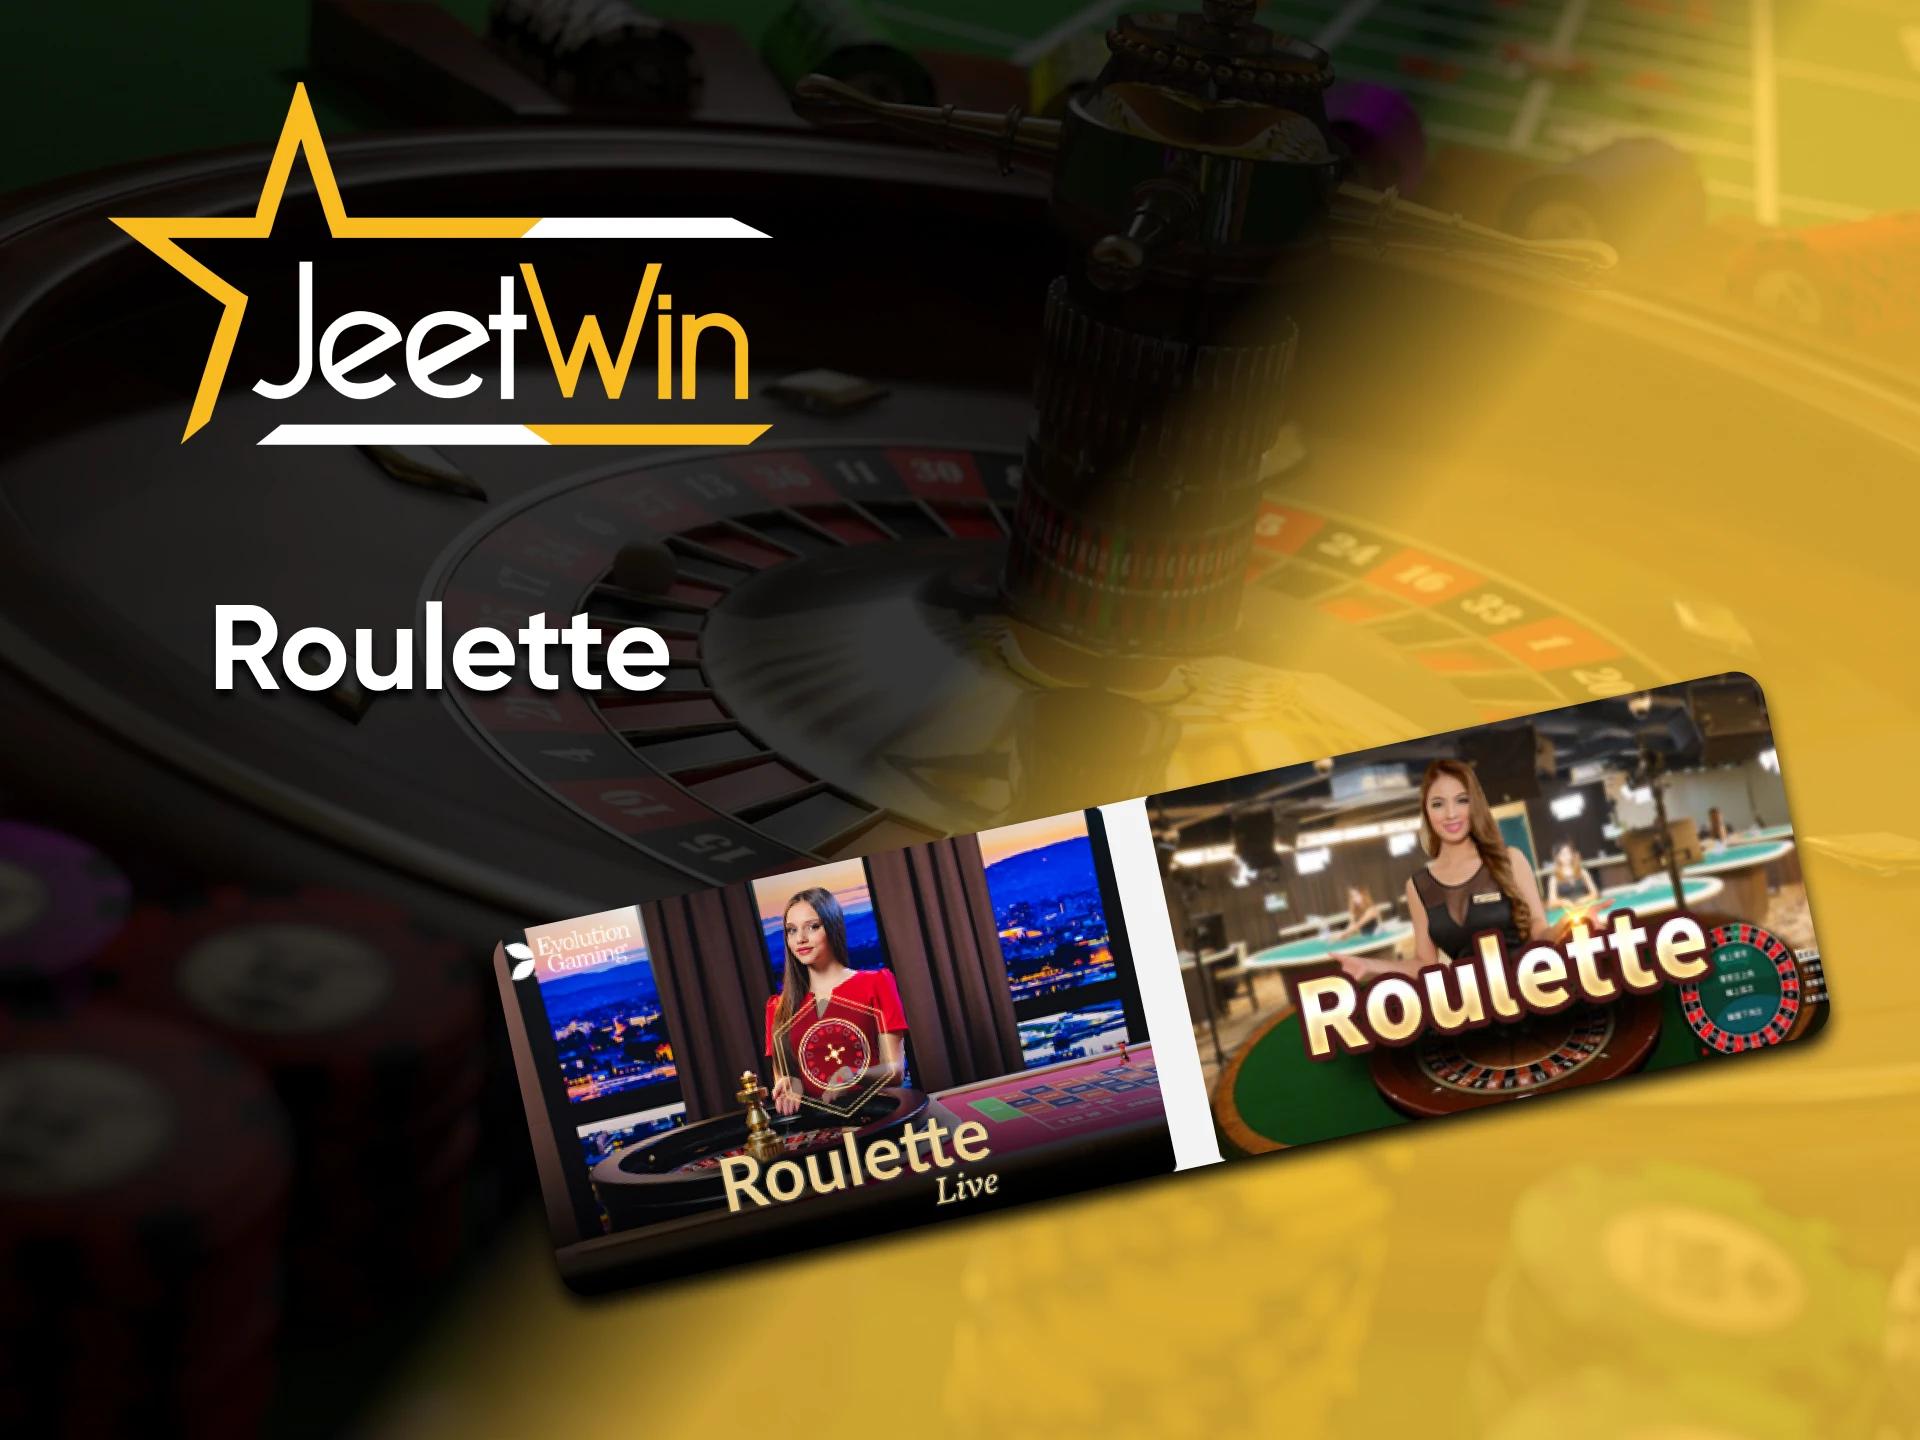 To play Roulette, you need to go to the desired section of the Jeetwin website.